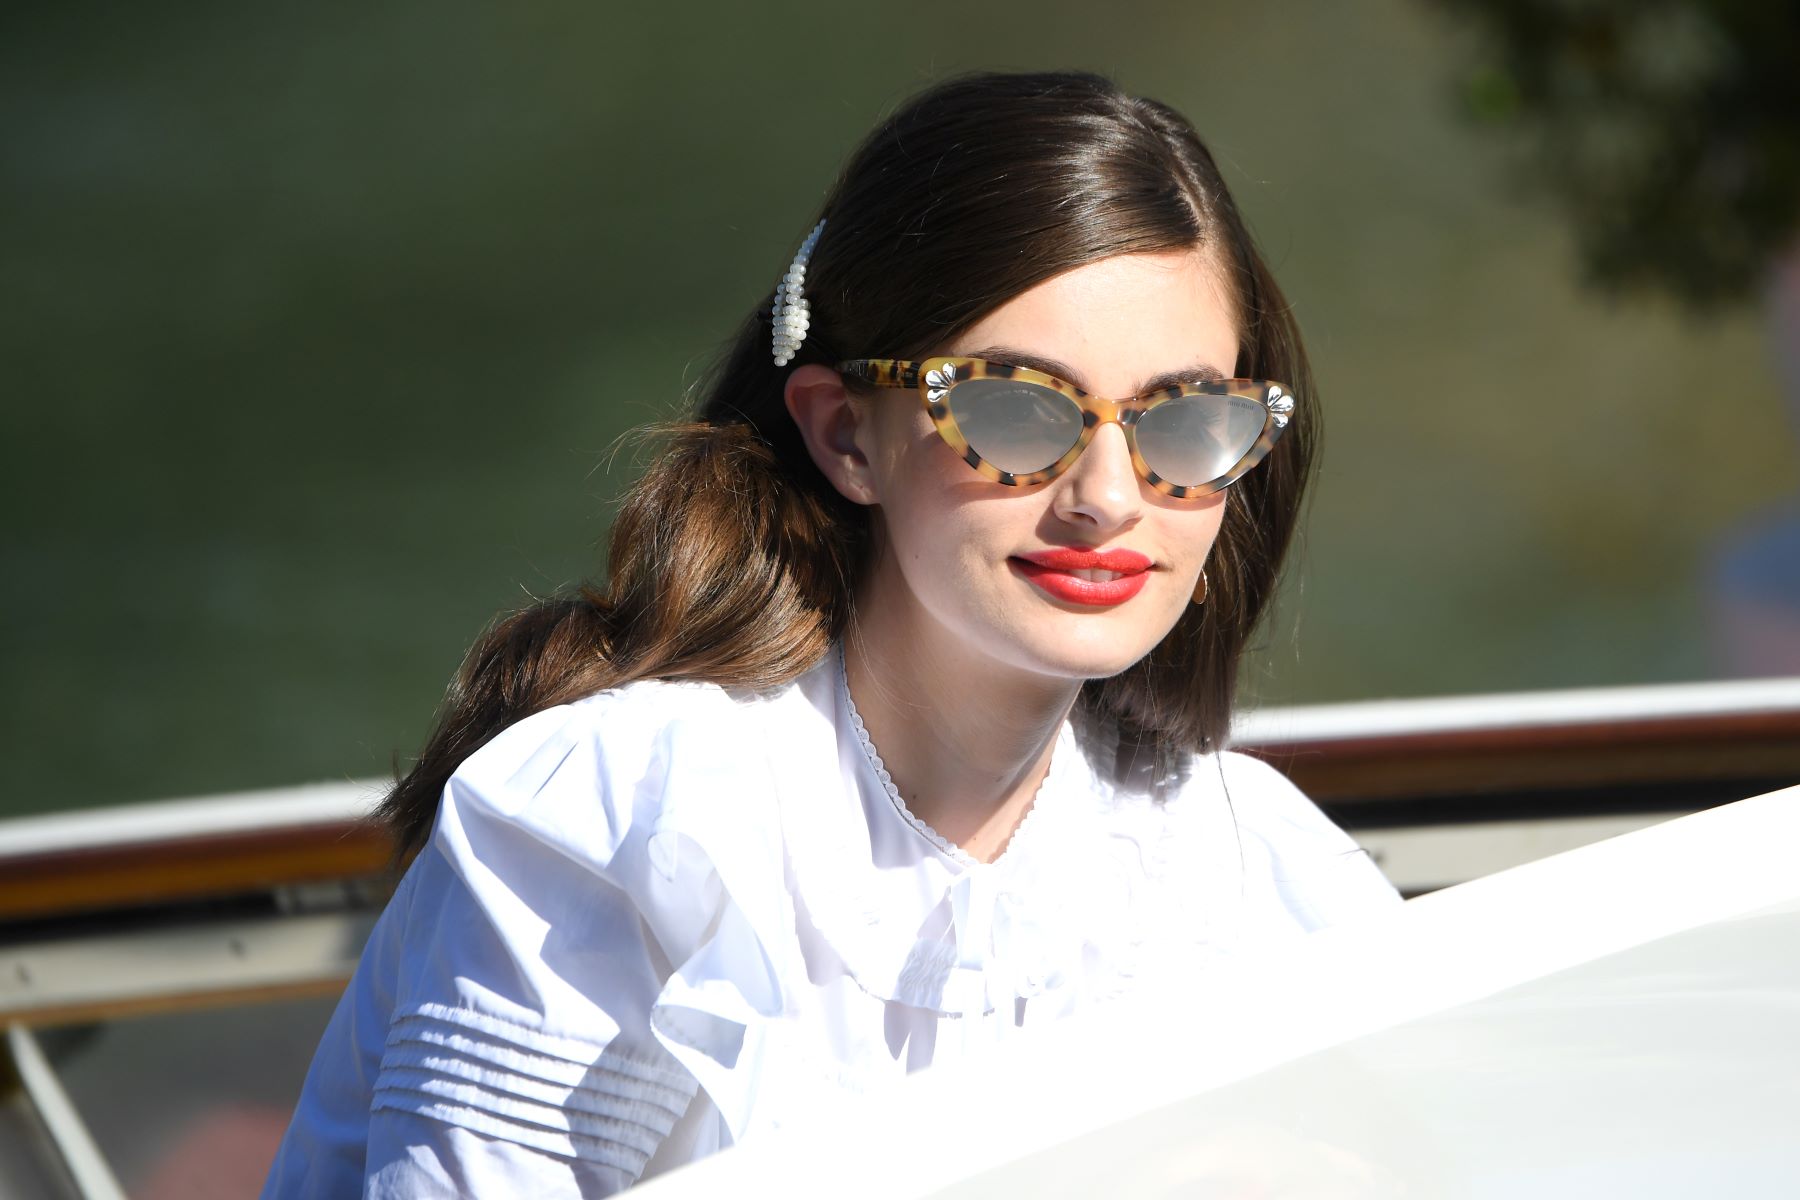 Diana Silvers at the 76th Venice Film Festial in Venice, Italy